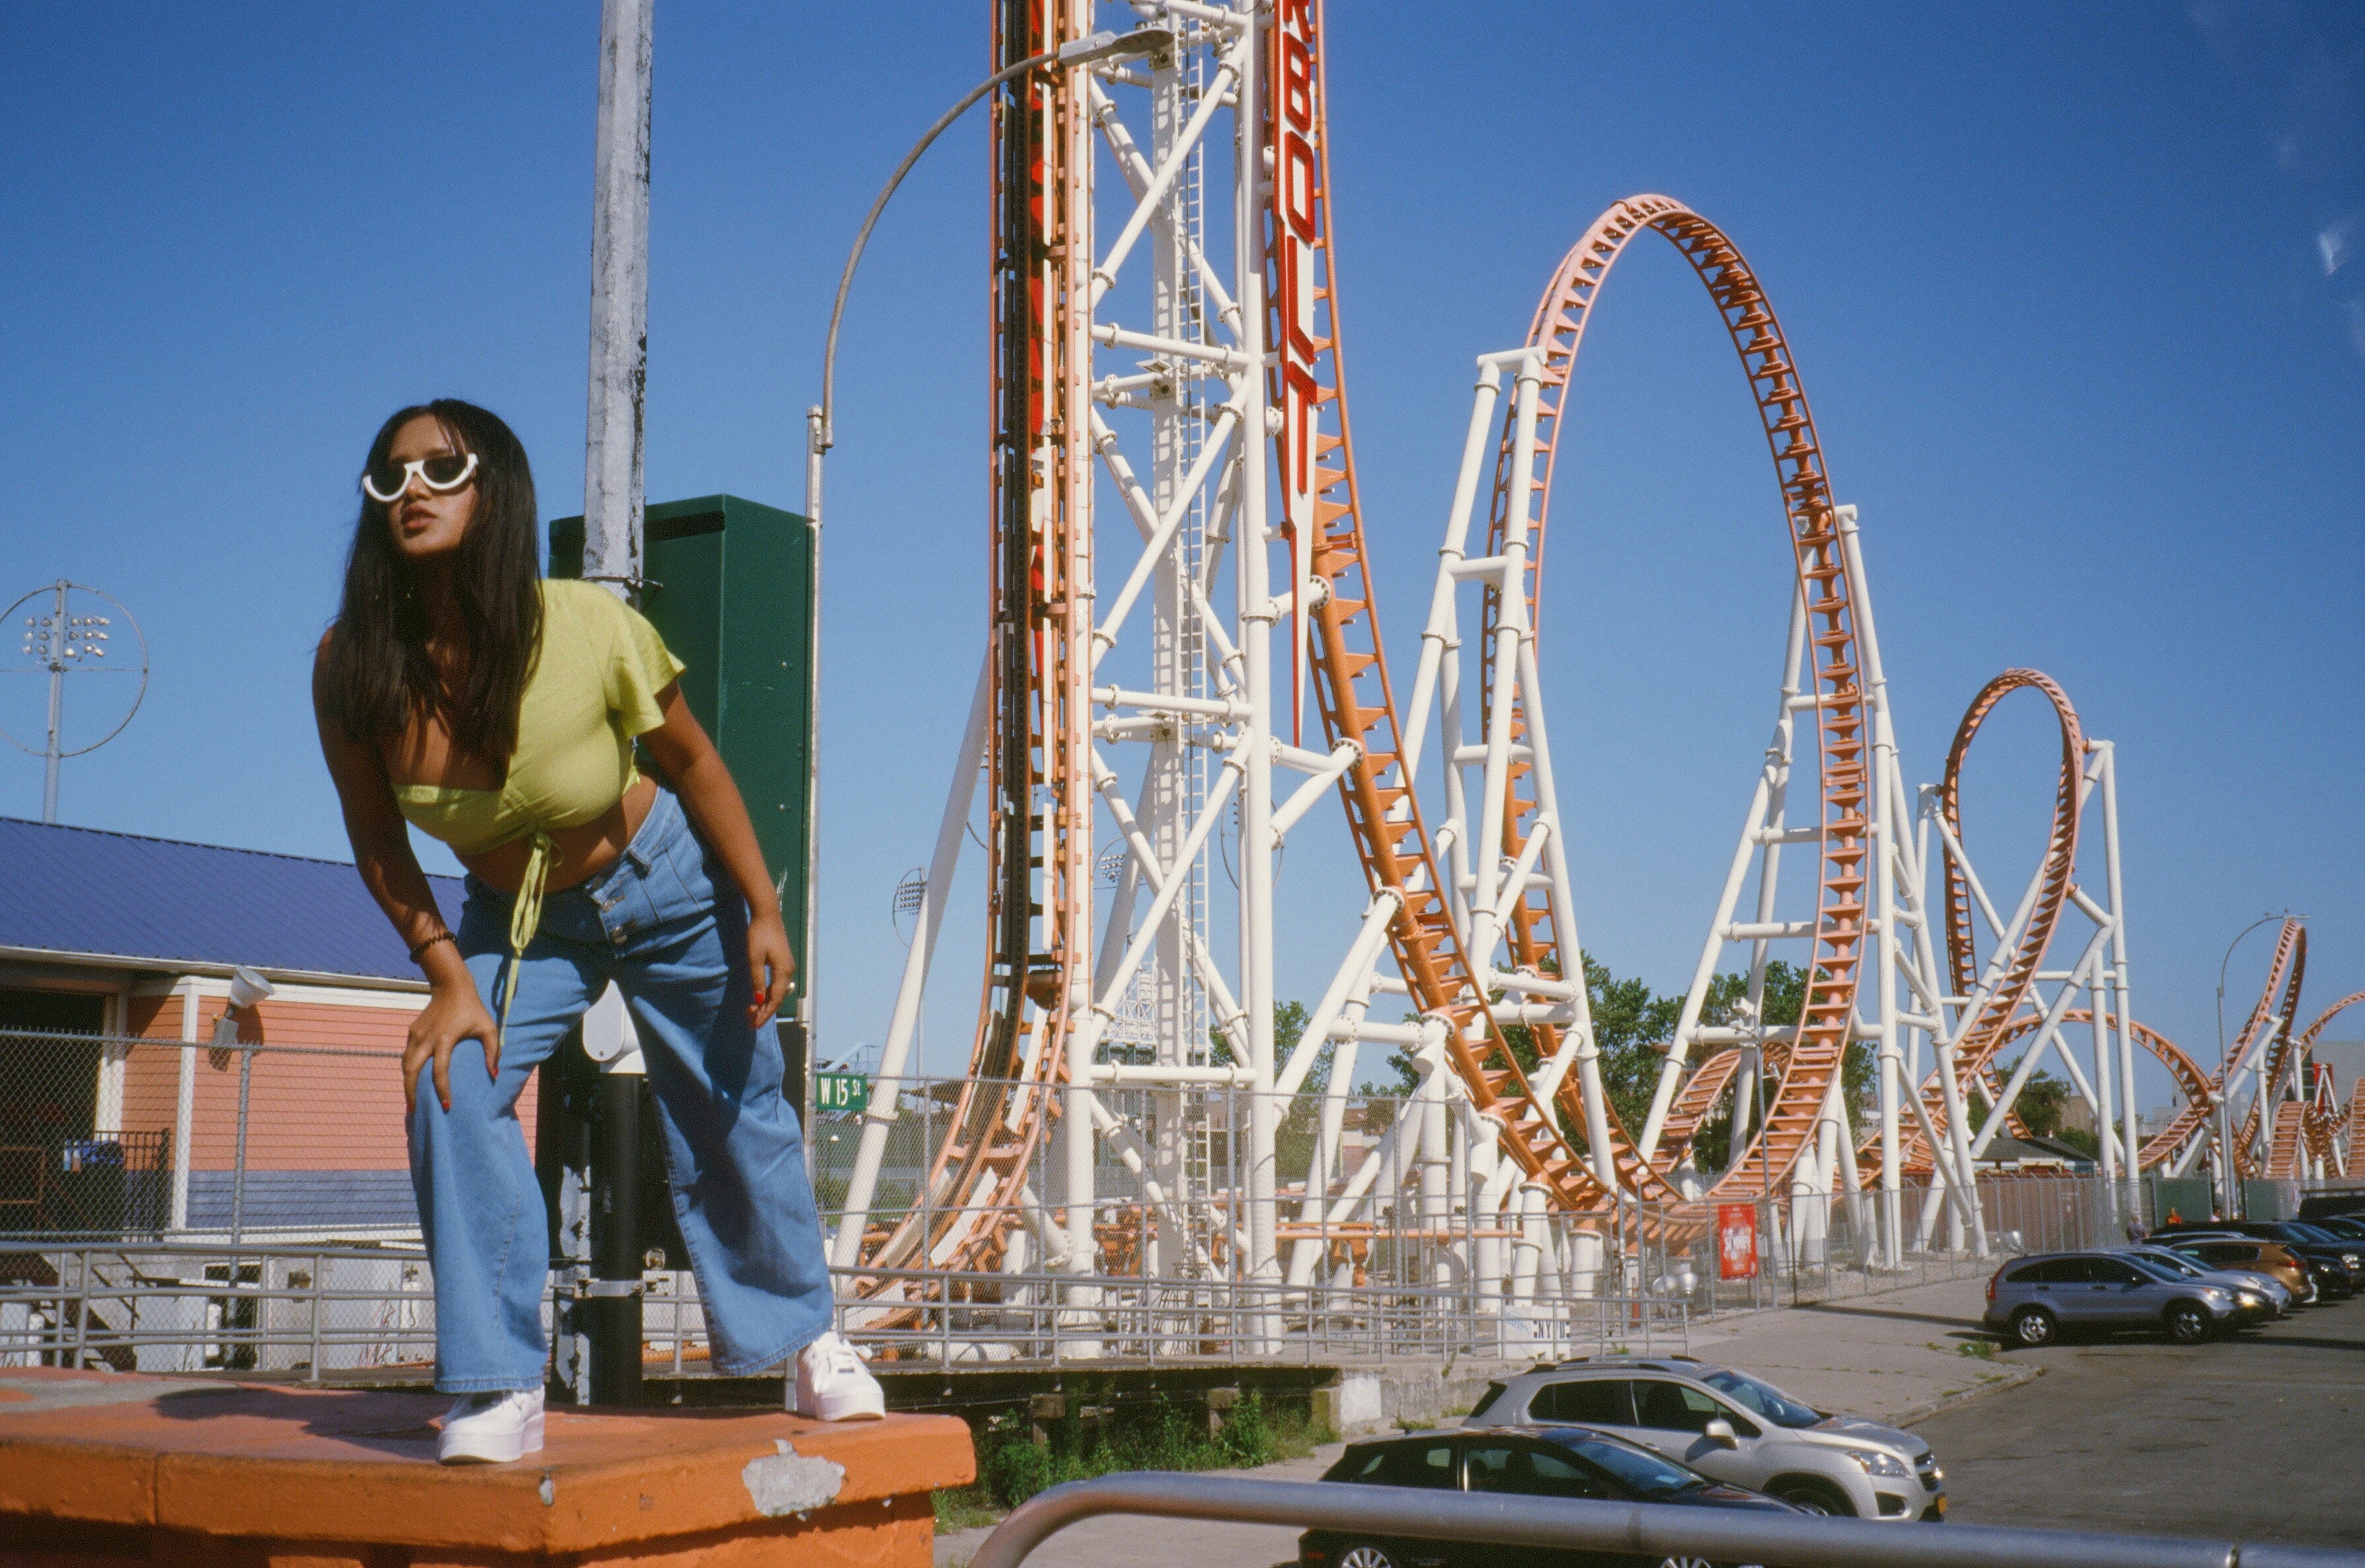 A woman in shades strikes a pose in front of a classic loop-the-loop rollercoaster